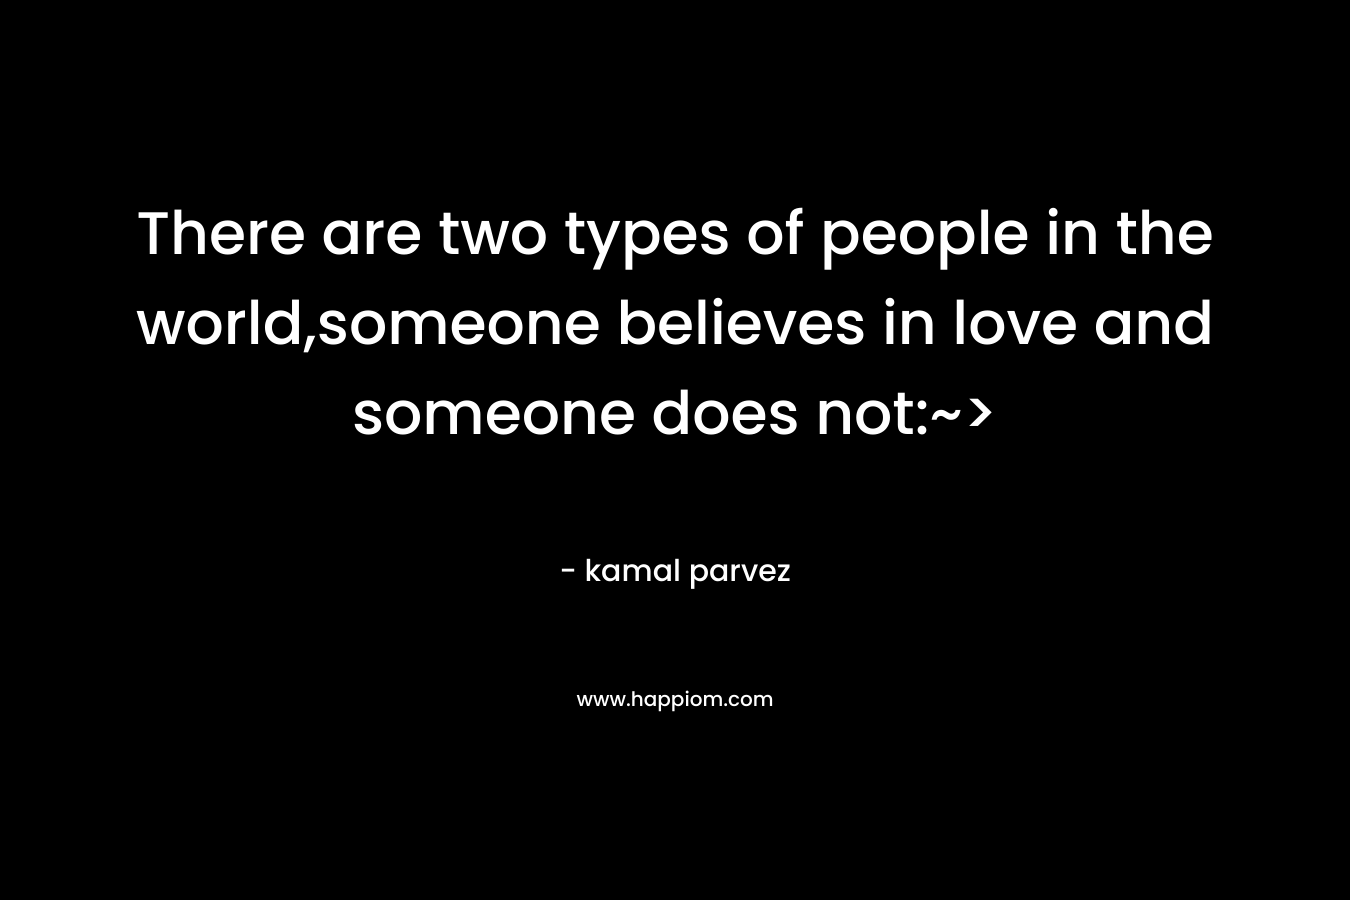 There are two types of people in the world,someone believes in love and someone does not:~> – kamal parvez